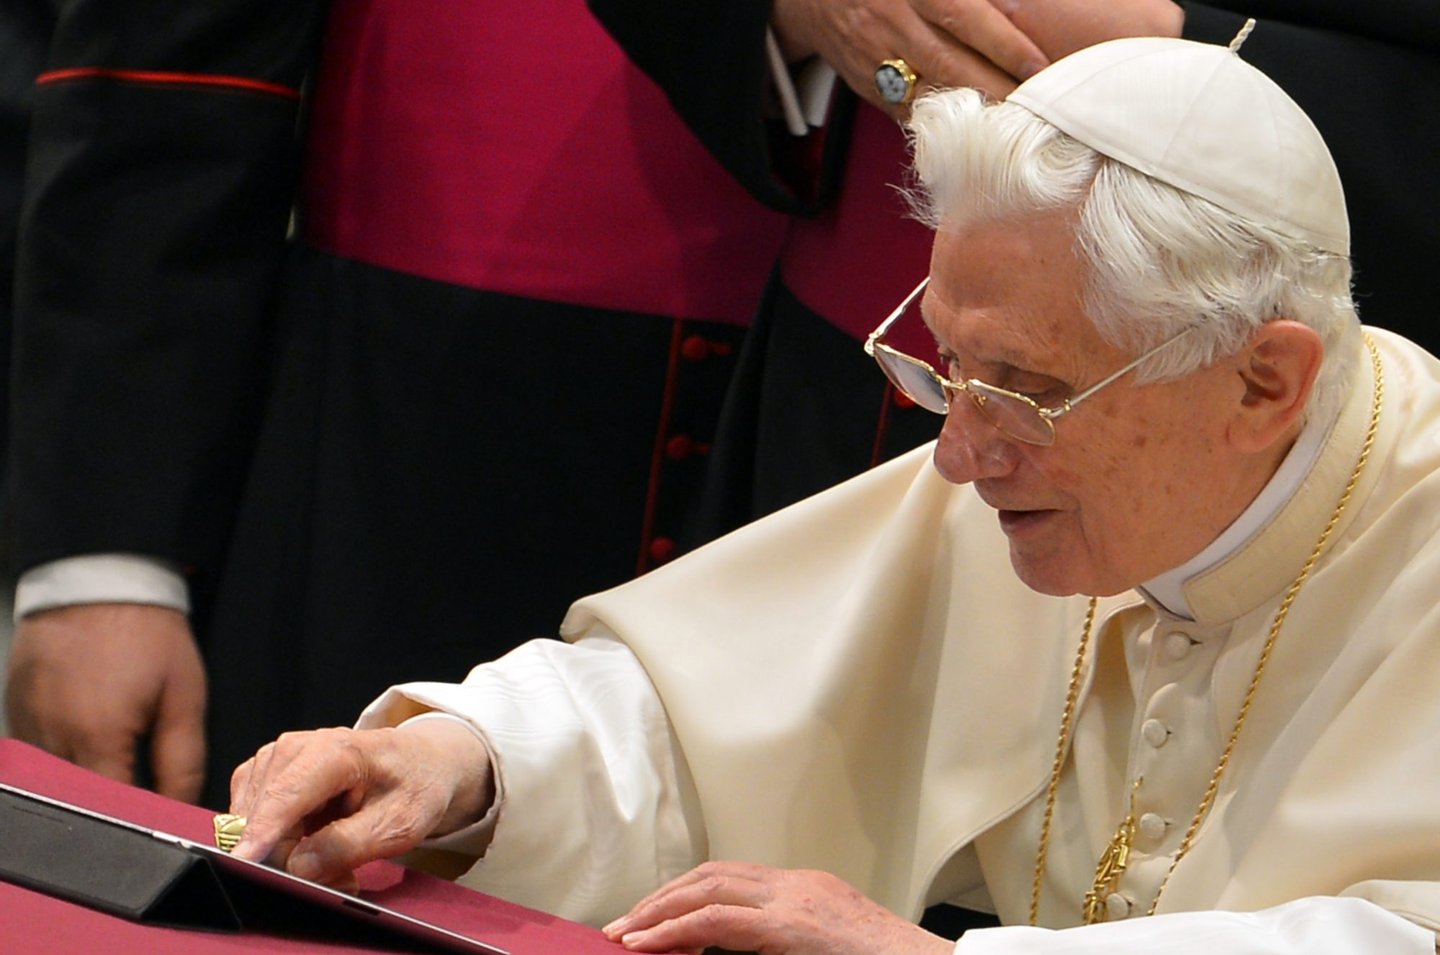 Pope Benedict XVI clicks on a tablet to send his first twitter message during his weekly general audience on December 12, 2012 at the Paul VI hall at the Vatican. Pope Benedict XVI sent his first Twitter message from a digital tablet on Wednesday using the handle @pontifex, blessing his hundreds of thousands of new Internet followers. AFP PHOTO / VINCENZO PINTO (Photo credit should read VINCENZO PINTO/AFP/Getty Images)